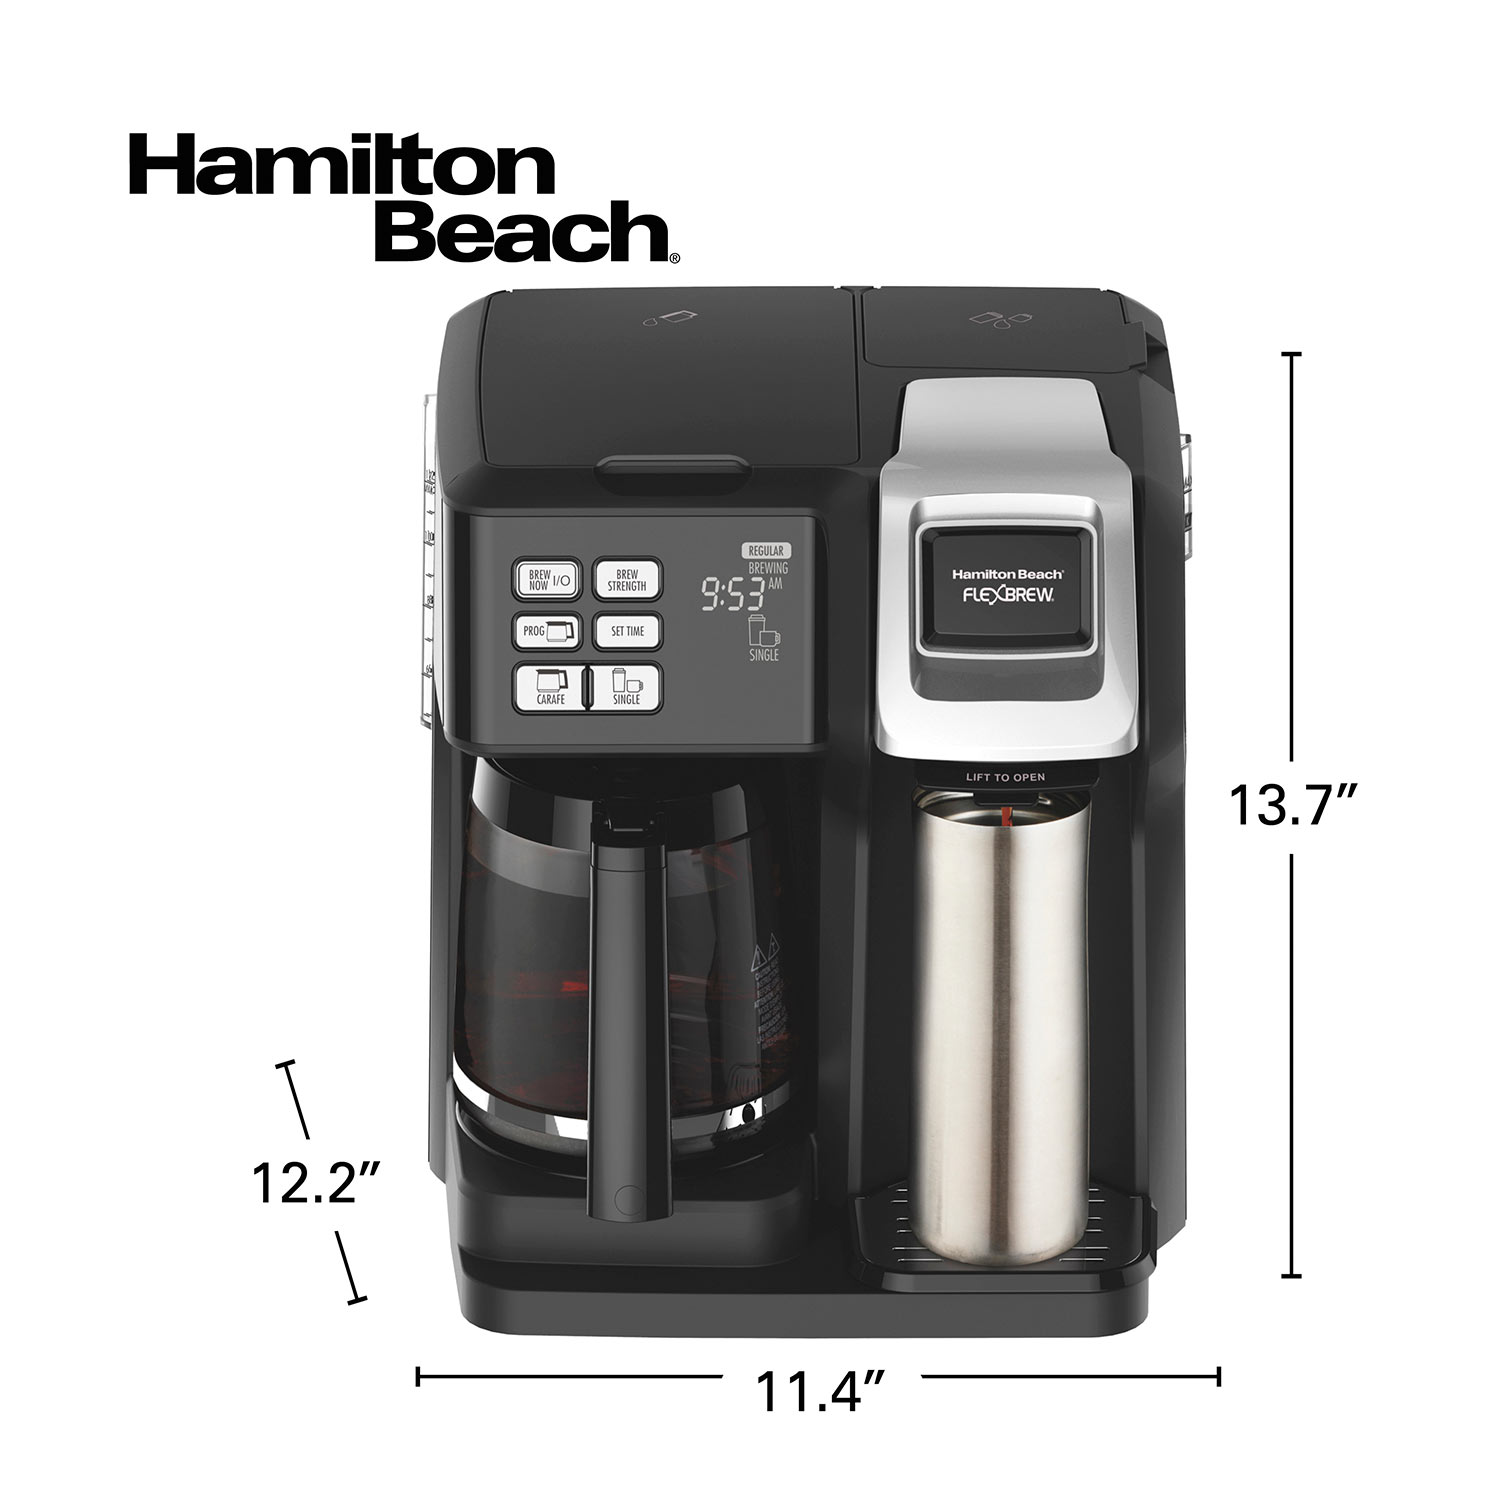  Hamilton Beach 2-in-1 Countertop Oven and Long Slot Toaster,  Stainless Steel & 2-Way 12 Cup Programmable Drip Coffee Maker & Single  Serve Machine, Black: Home & Kitchen